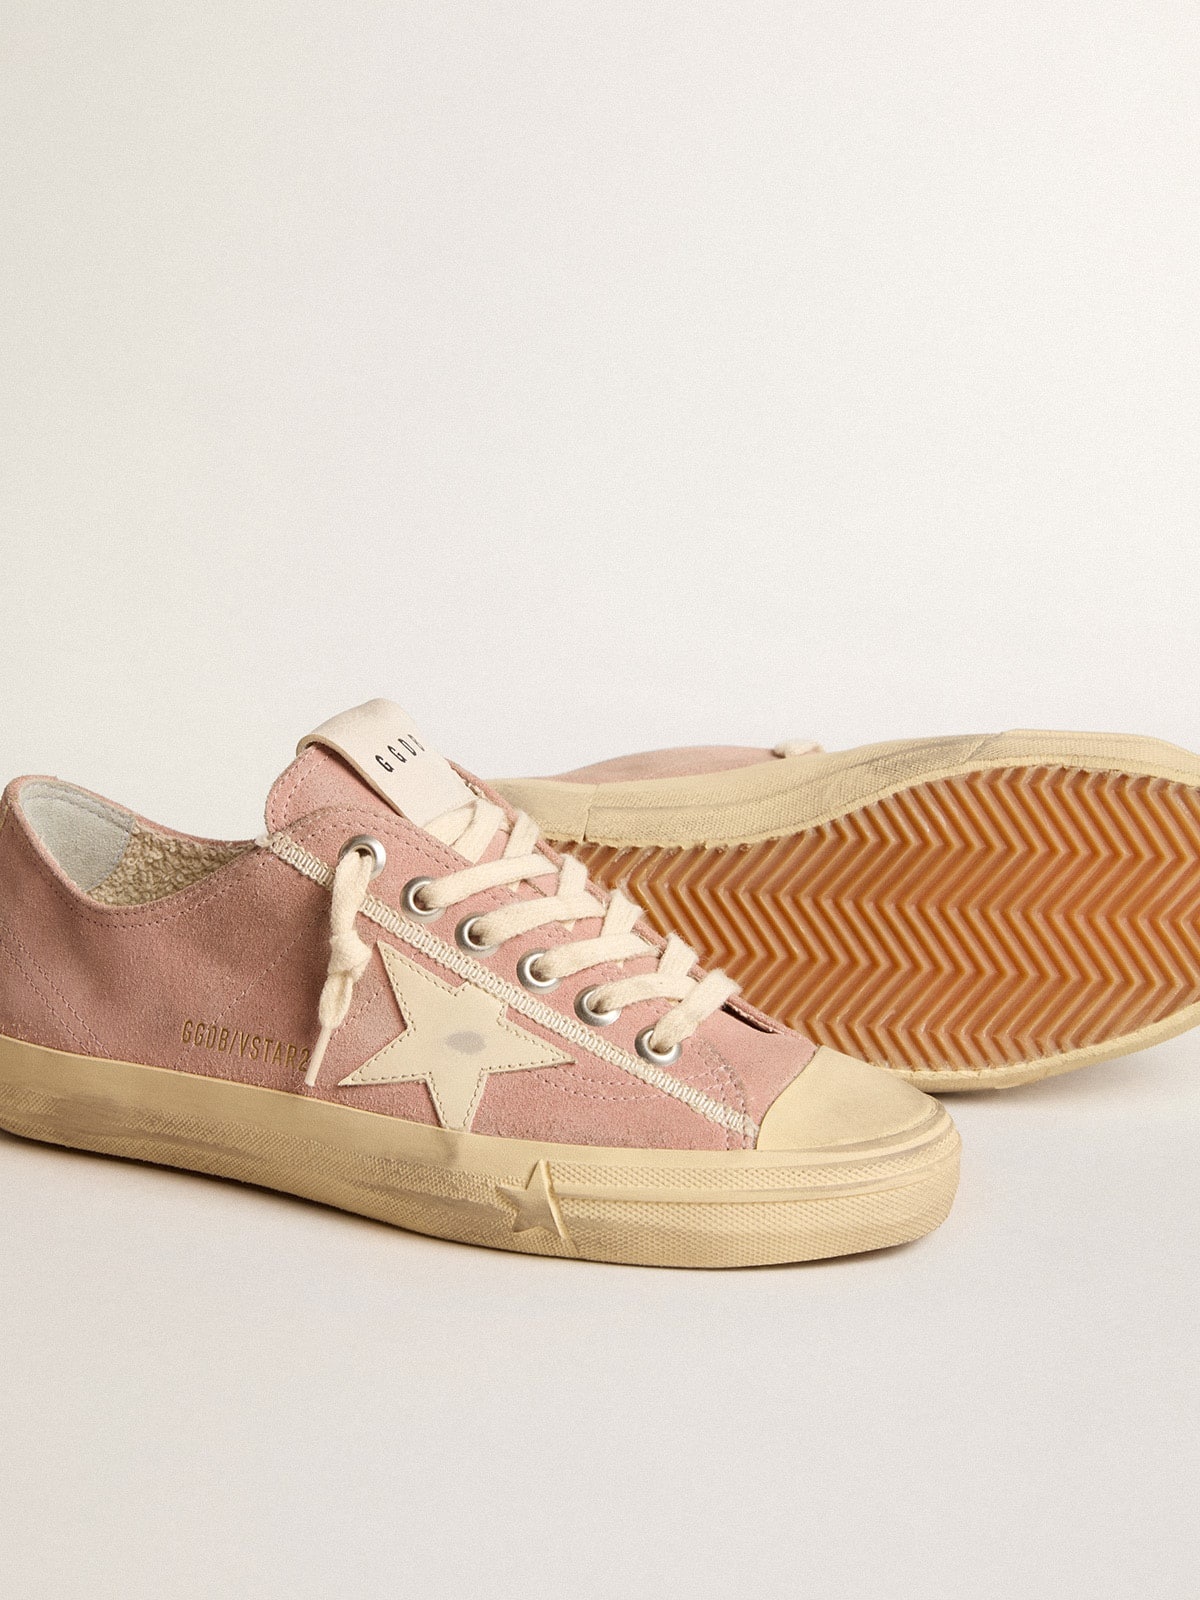 V-Star in pink suede with cream leather star - 3